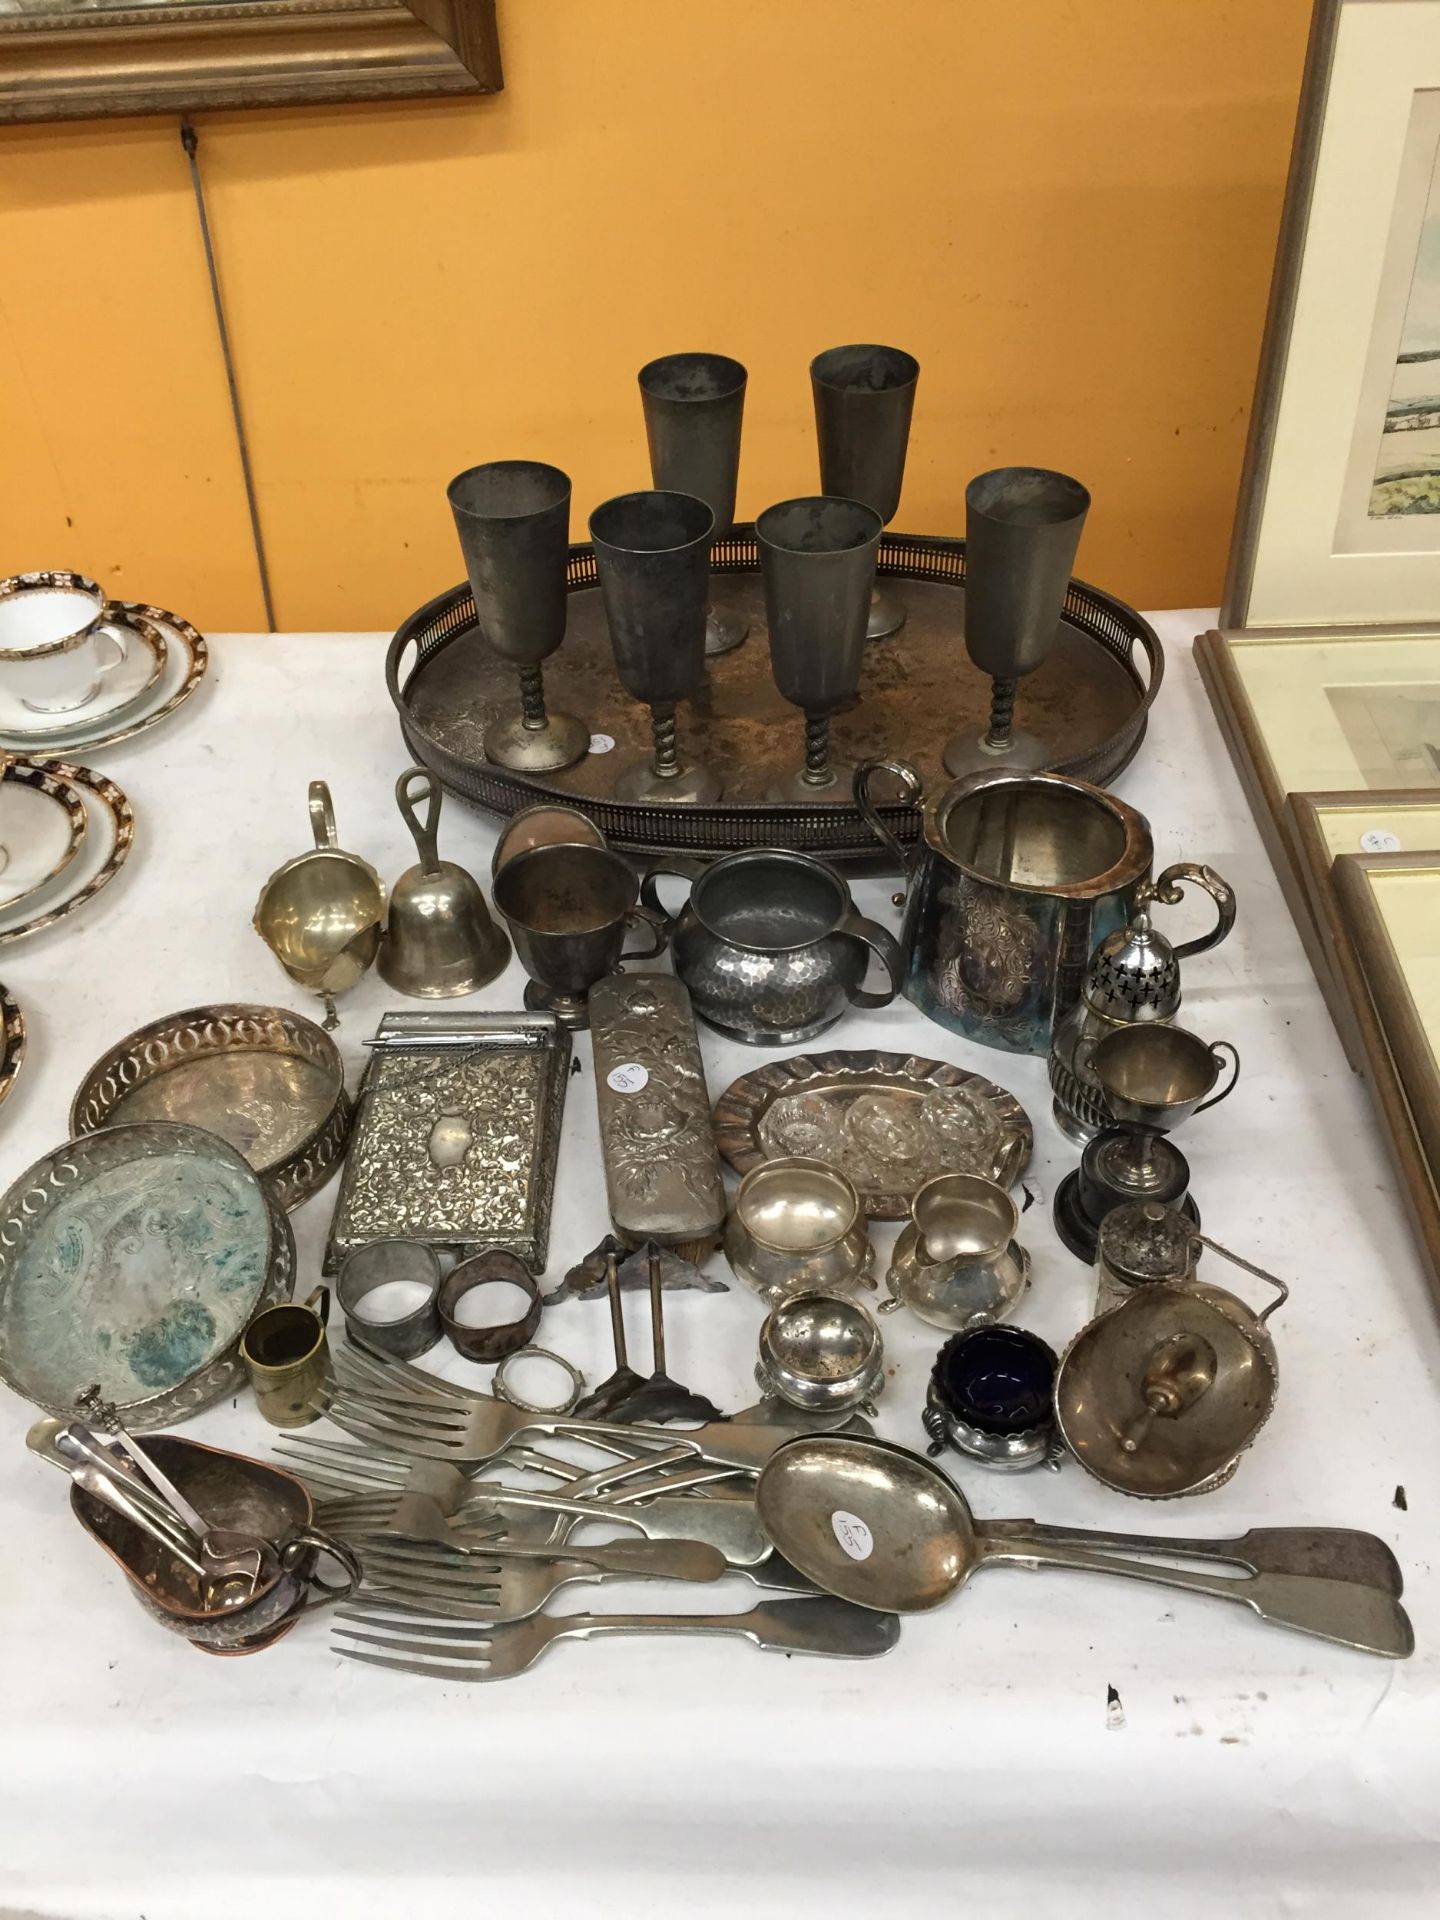 A LARGE QUANTITY OF WHITE METAL AND SILVER PLATE ITEMS TO INCLUDE A TRAY, SIX GOBLETS, FLATWARE, ETC